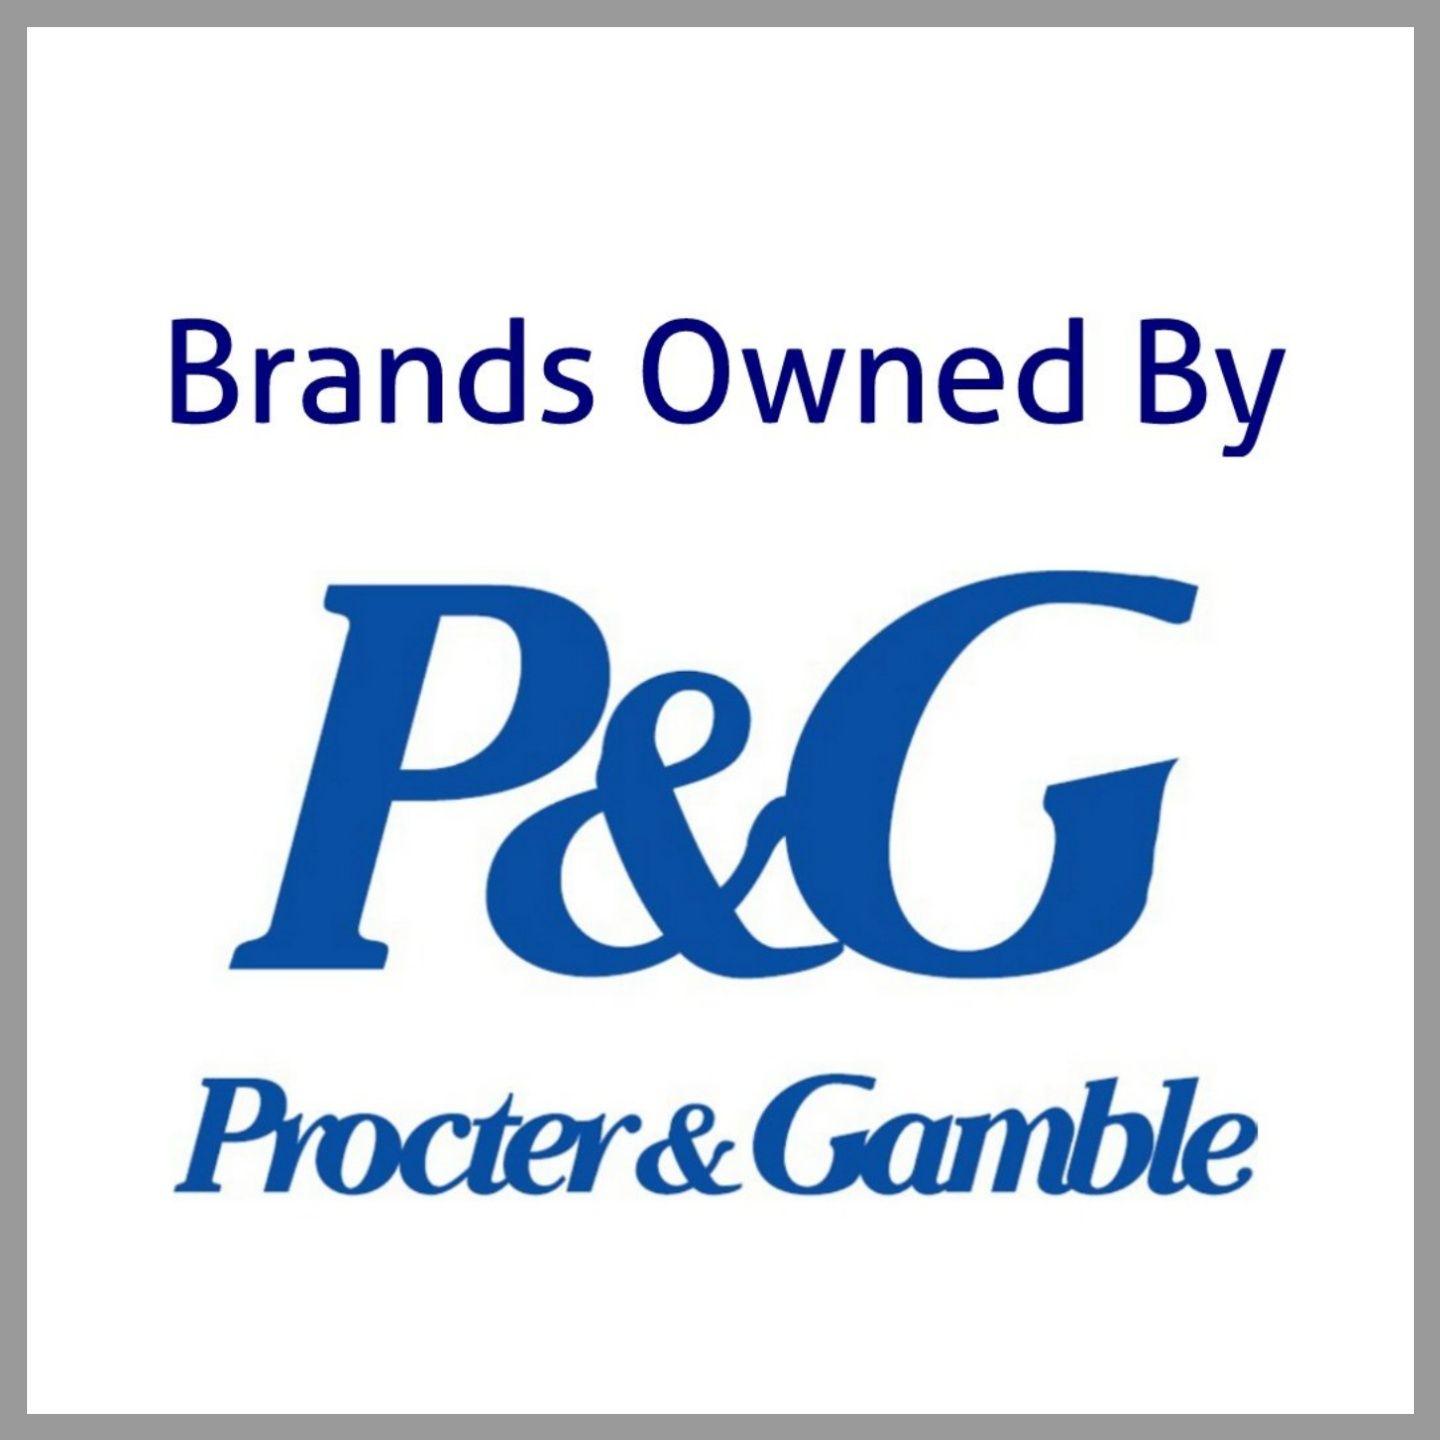 Procter and Gamble Brand Logo - Brands Owned by Proctor and Gamble 2018 - Beyond Cruelty-Free